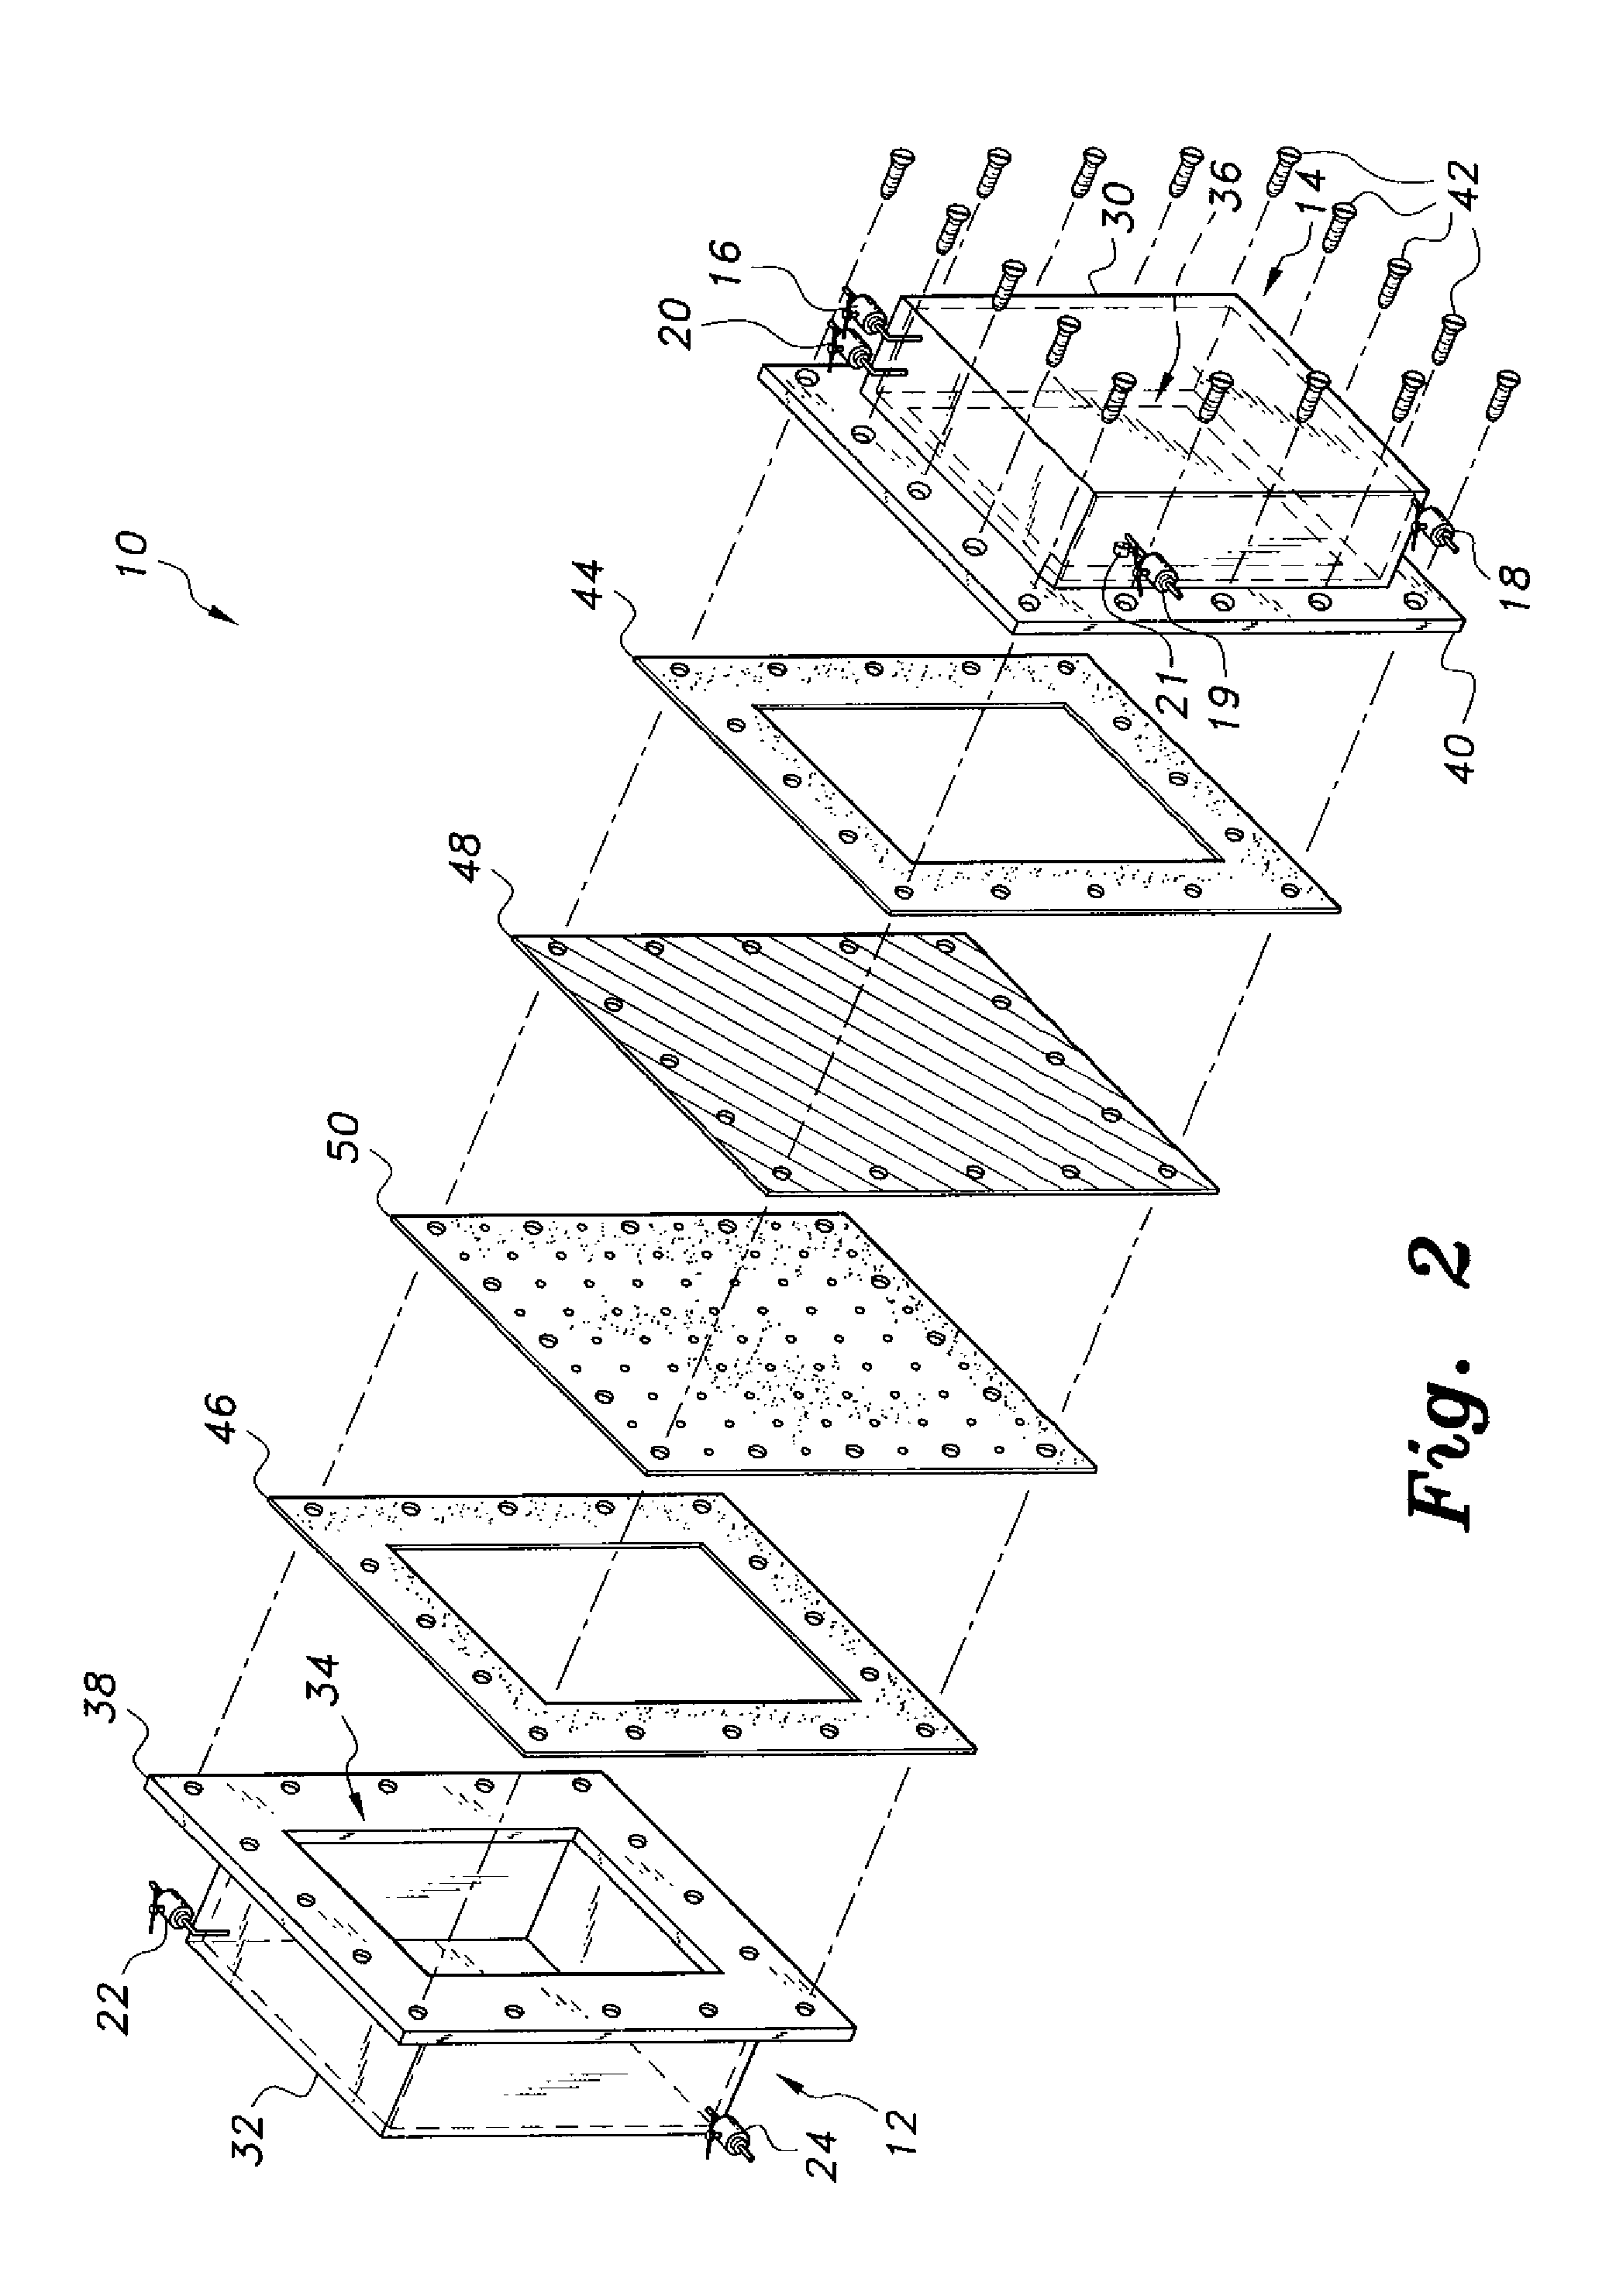 Device and method for testing reverse osmosis membranes